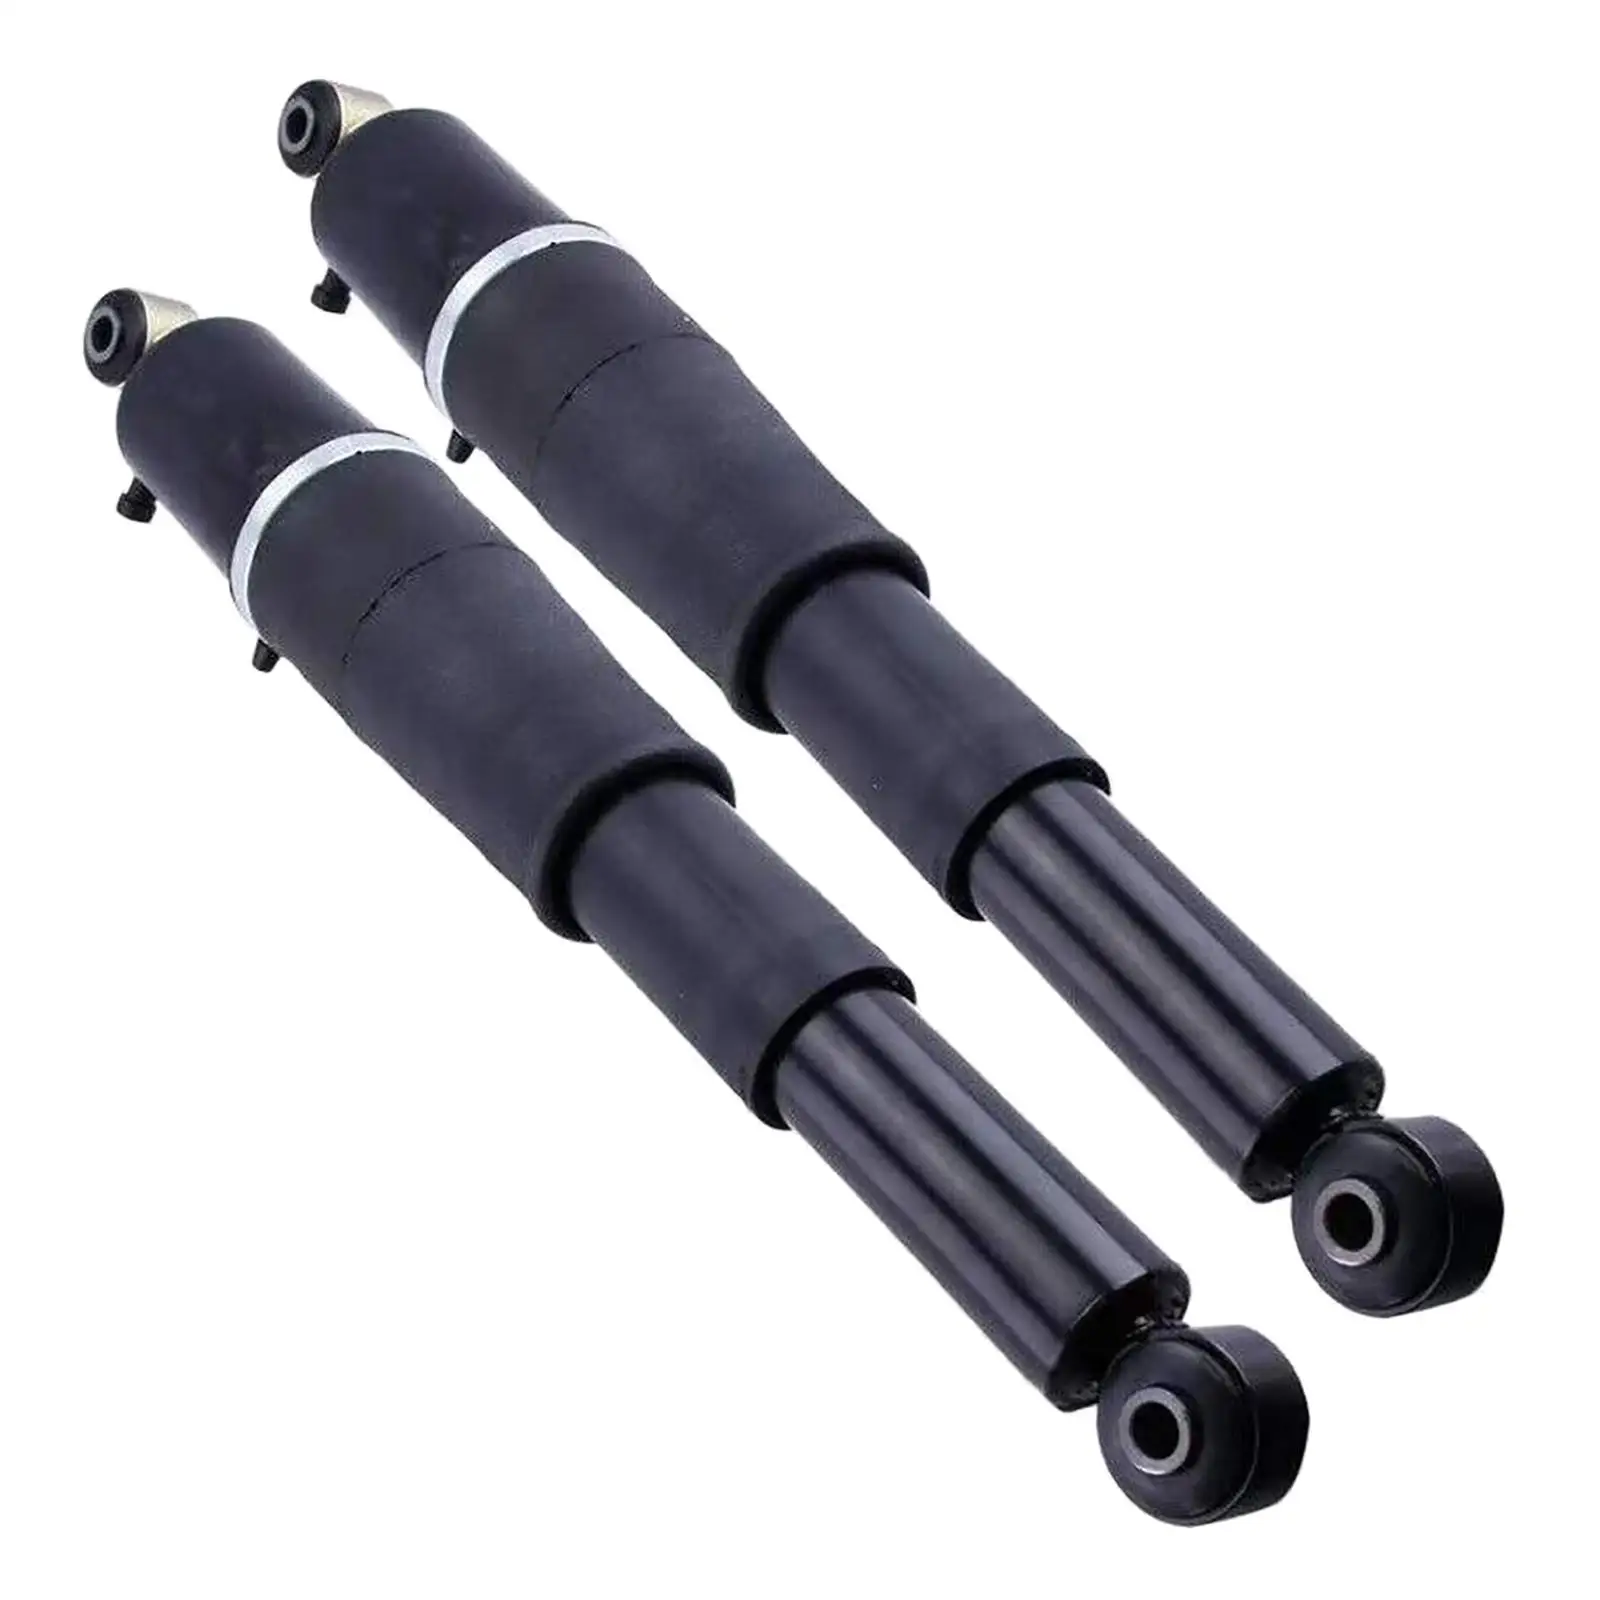 Rear Air Lift Shock Struts Shock Absorber Fits for Chevy Avalanche / 1500 02-13 22187156 25979391 19300070 25979394 AS-2127